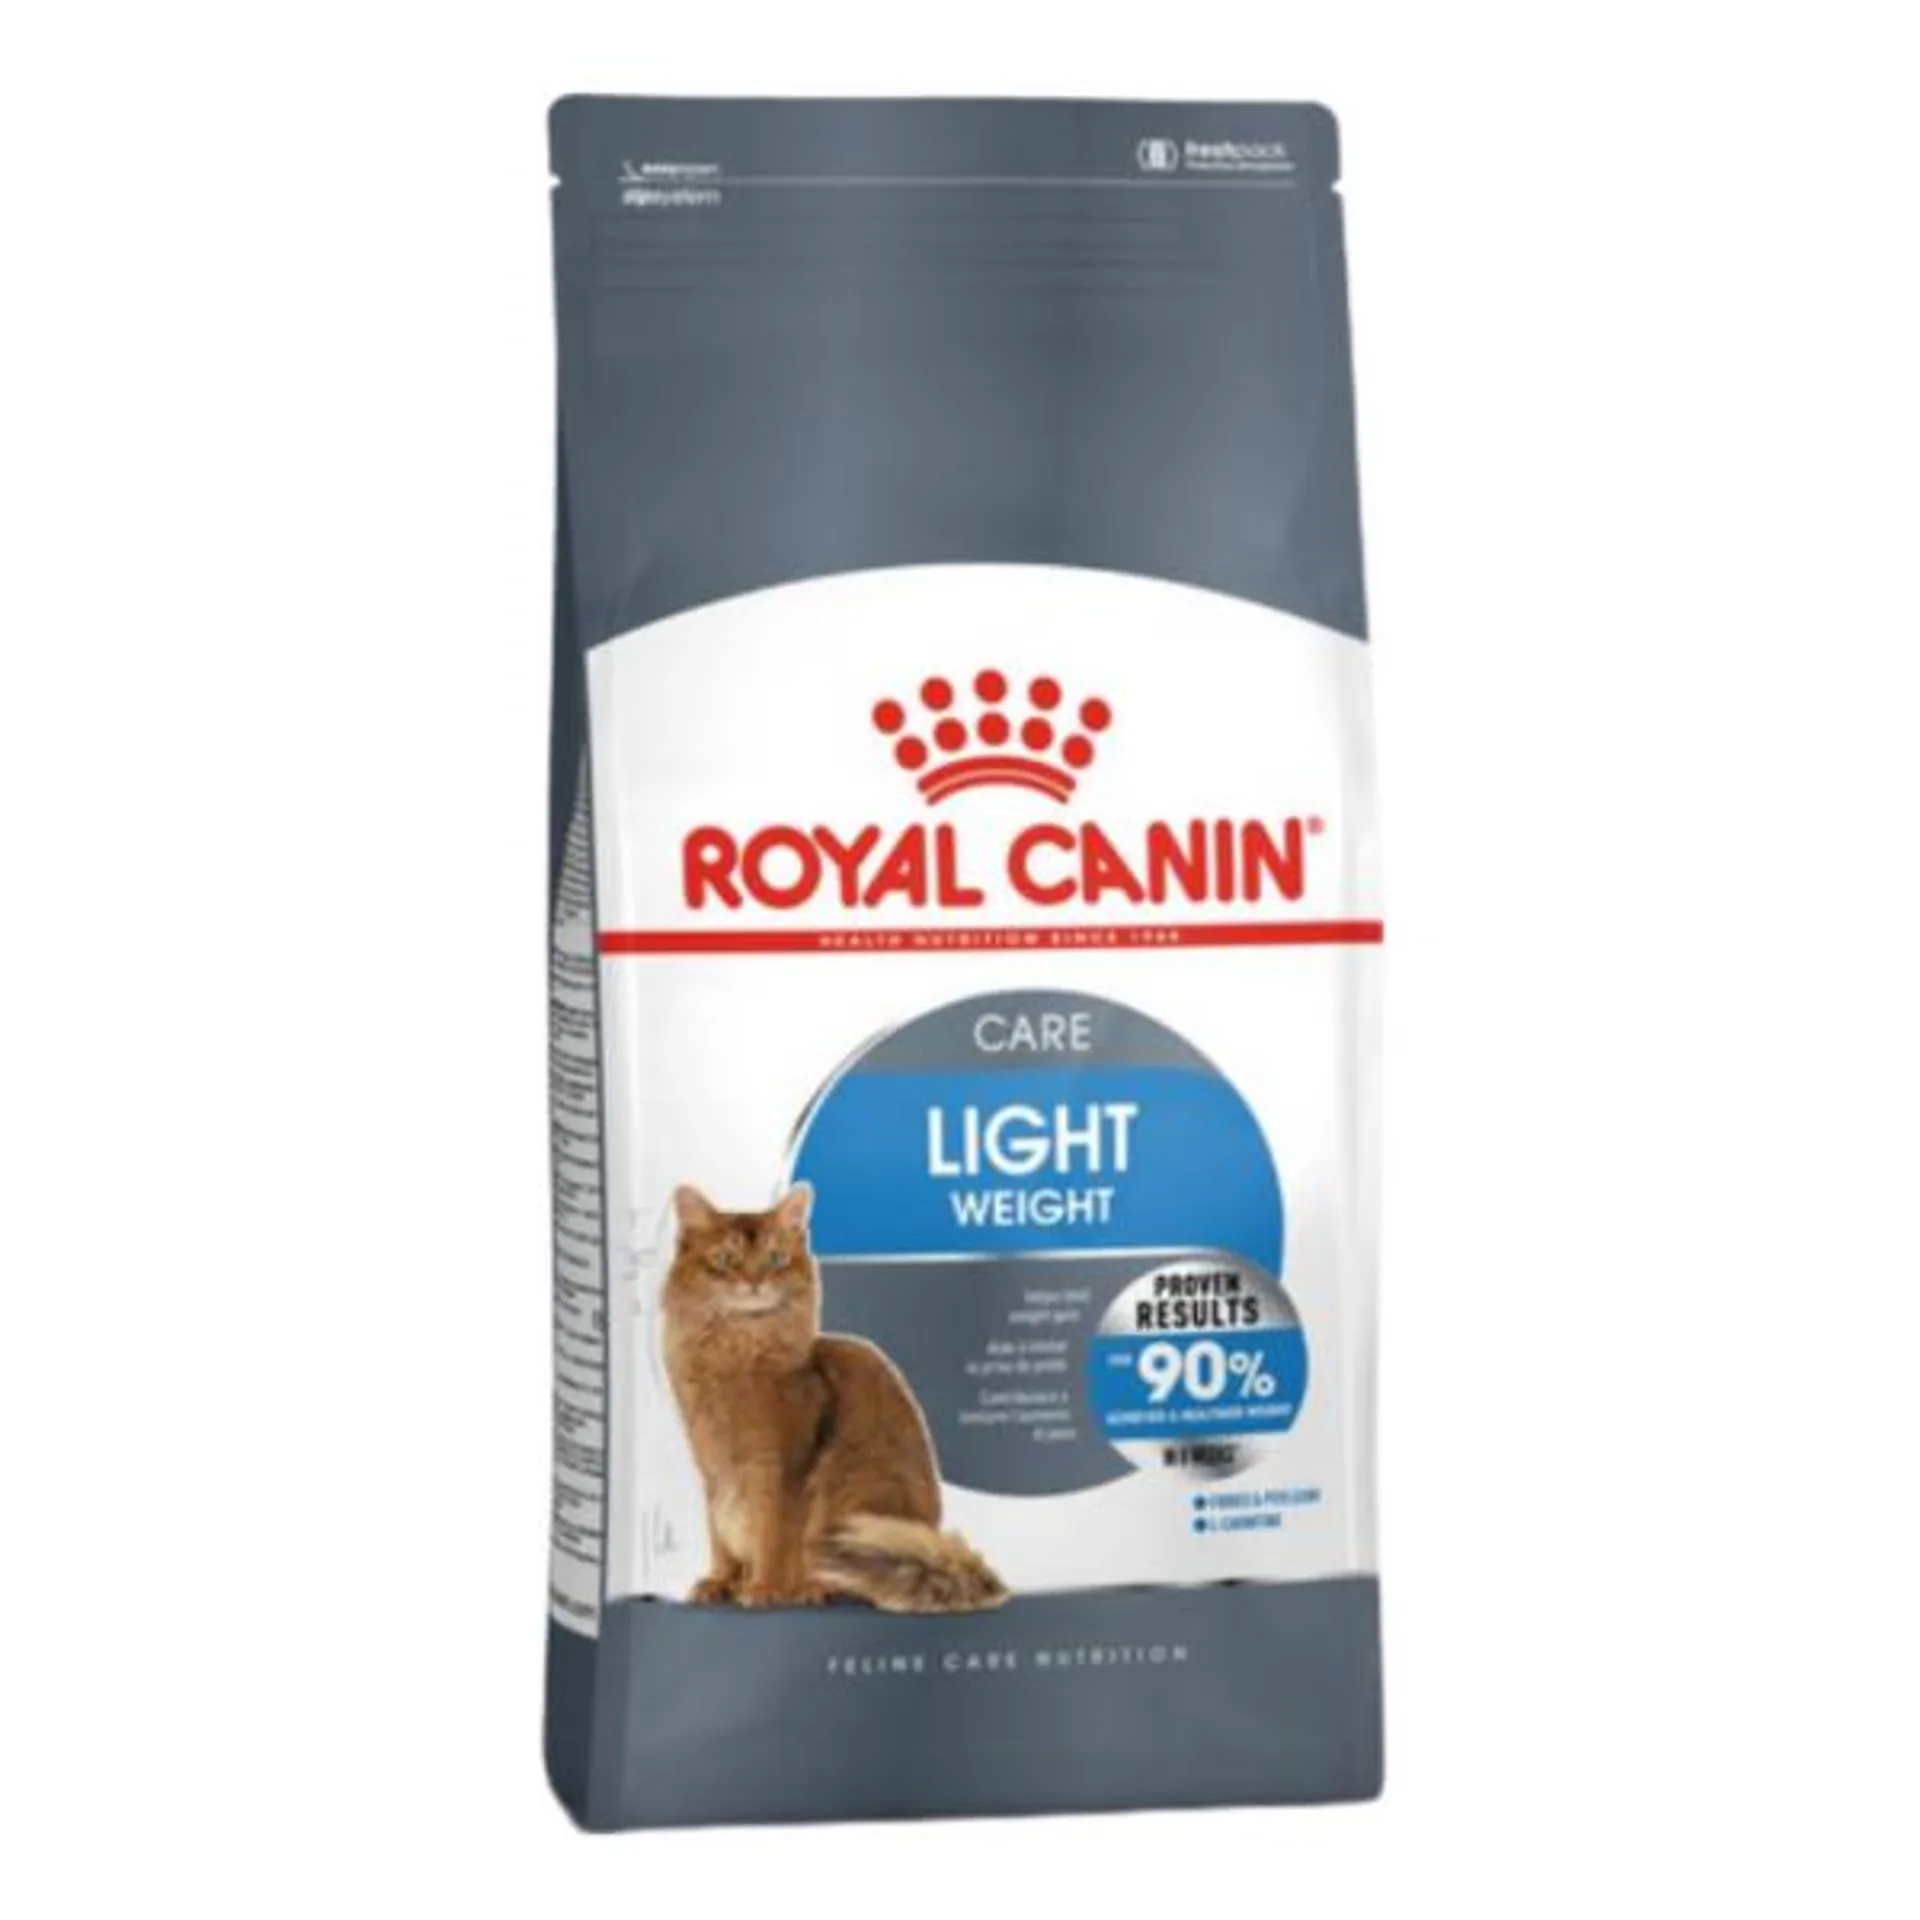 Royal Canin - Light Weight Care Adult Dry Cat Food (3kg)